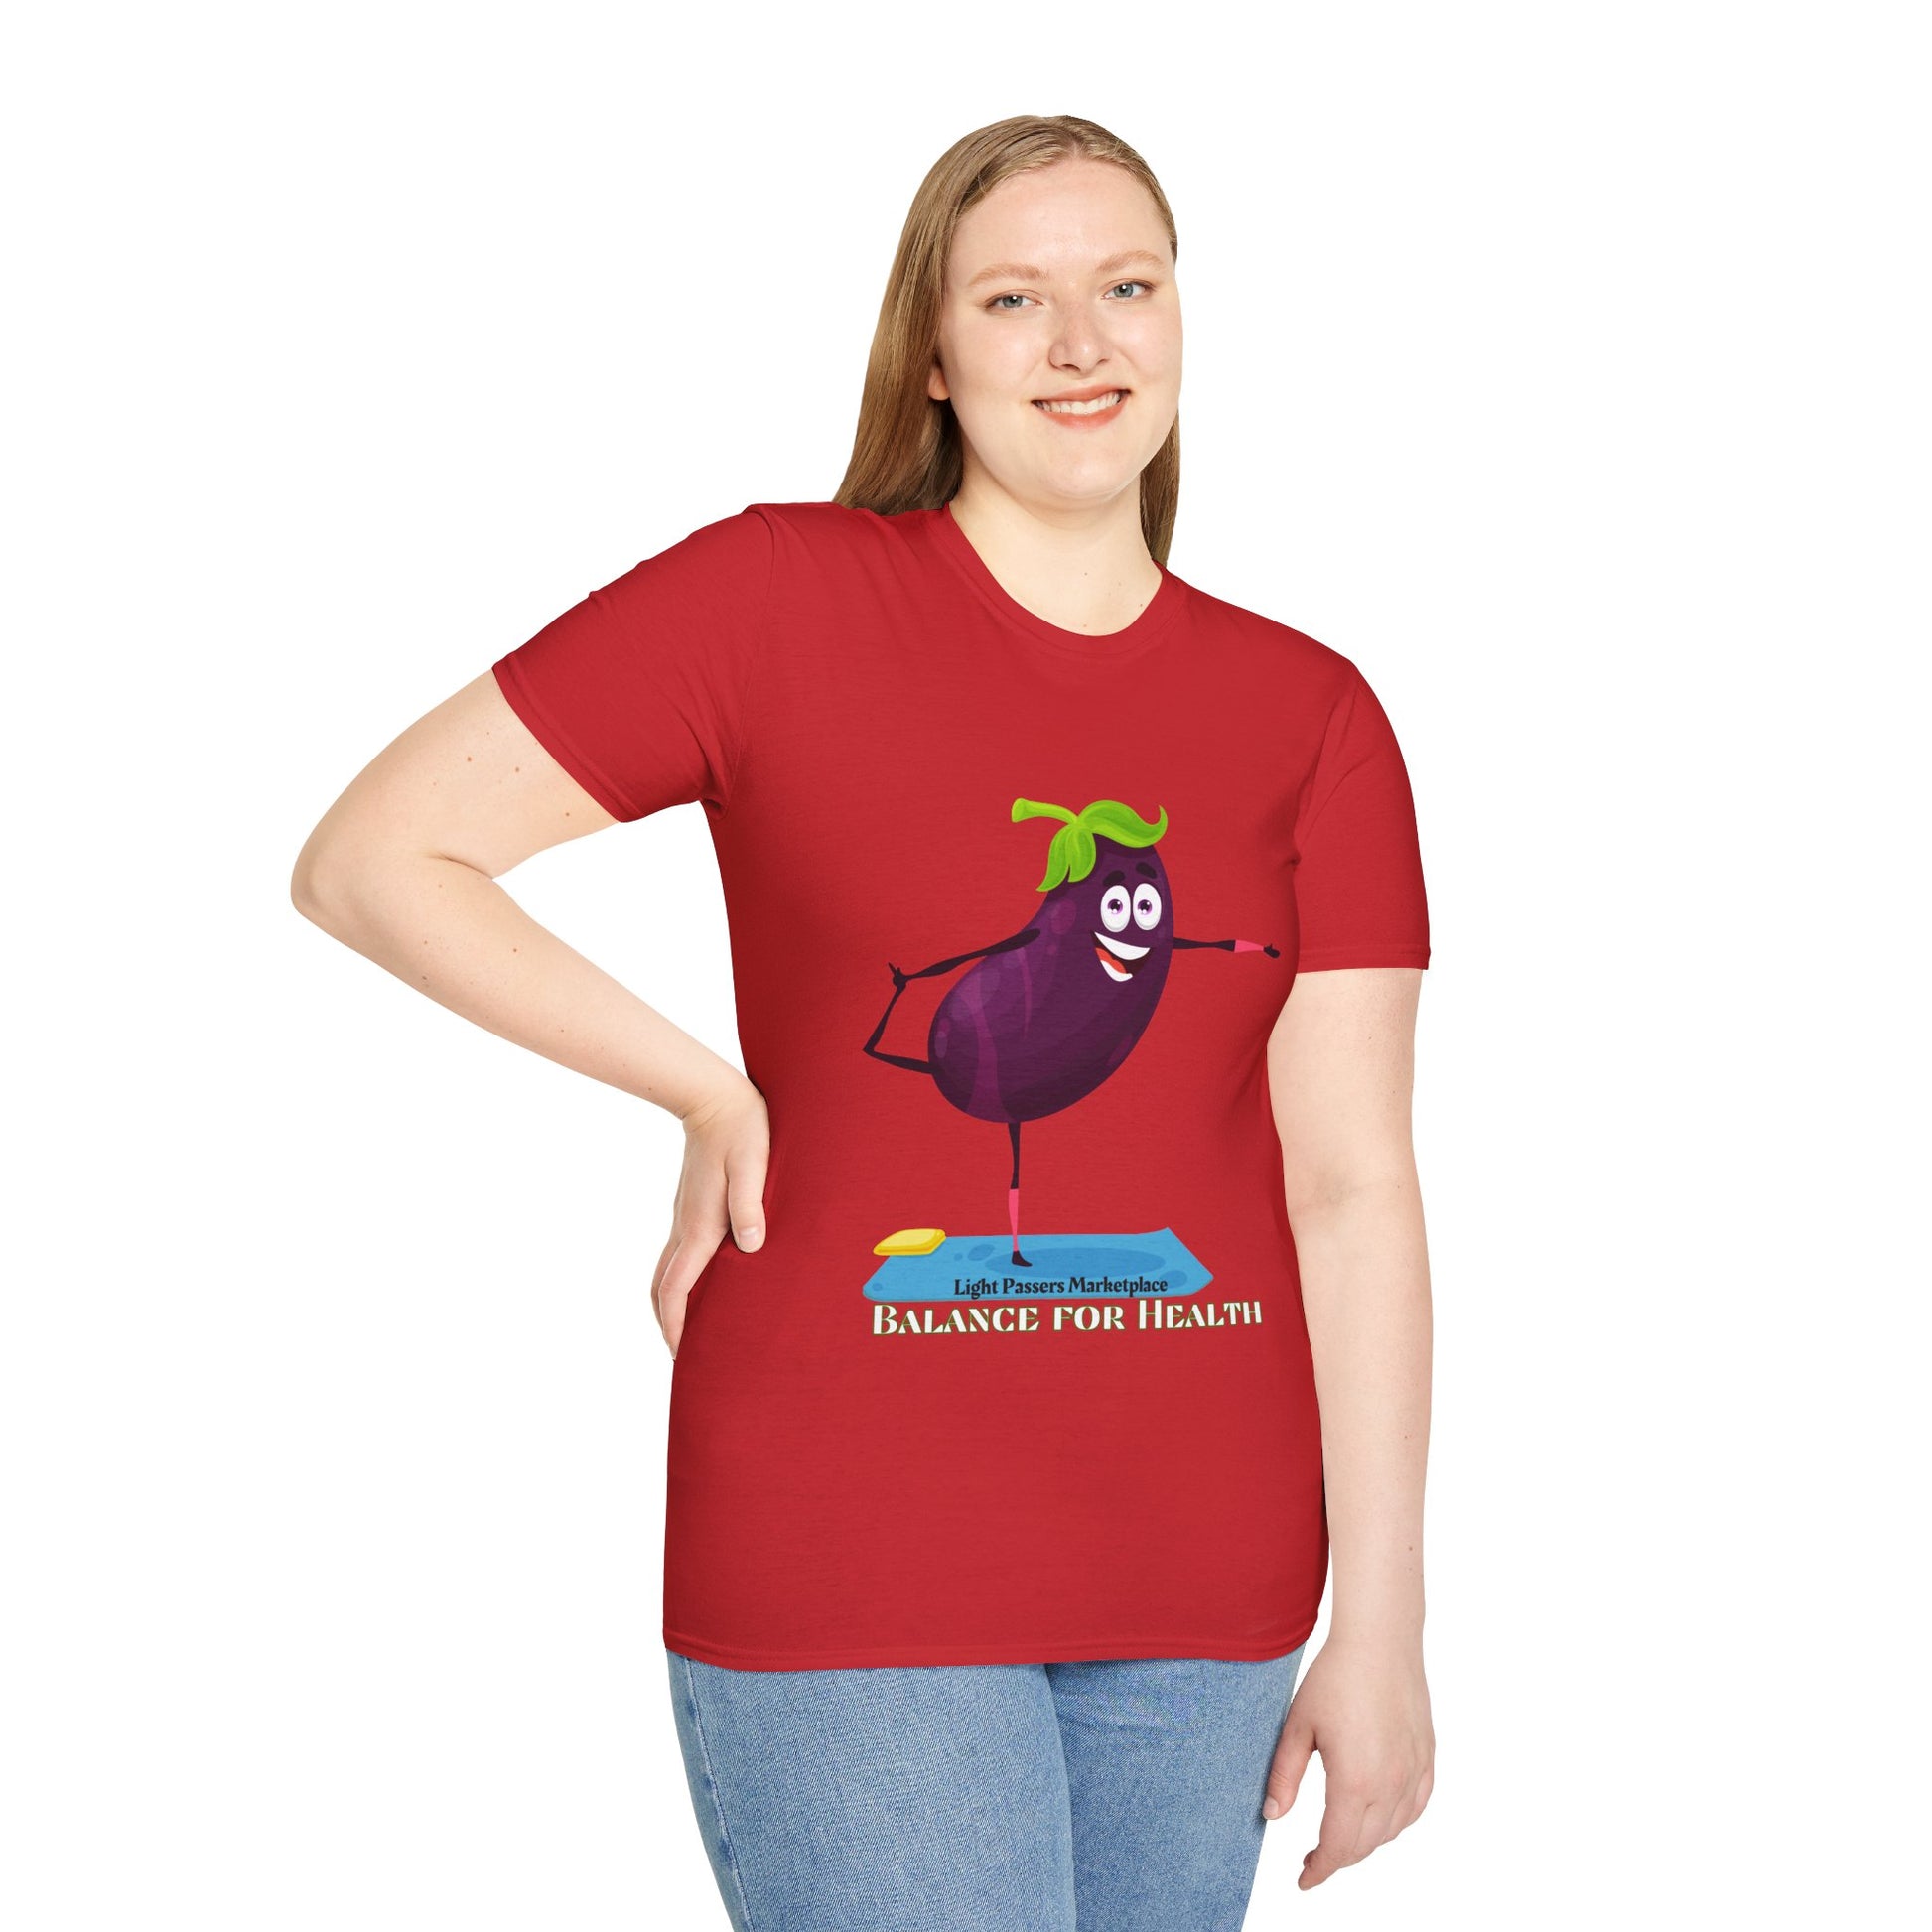 A woman in a red shirt smiles, wearing a t-shirt with a cartoon eggplant design. Unisex soft-style tee, 100% cotton, lightweight fabric, crew neckline, tear-away label, ethically sourced US cotton.